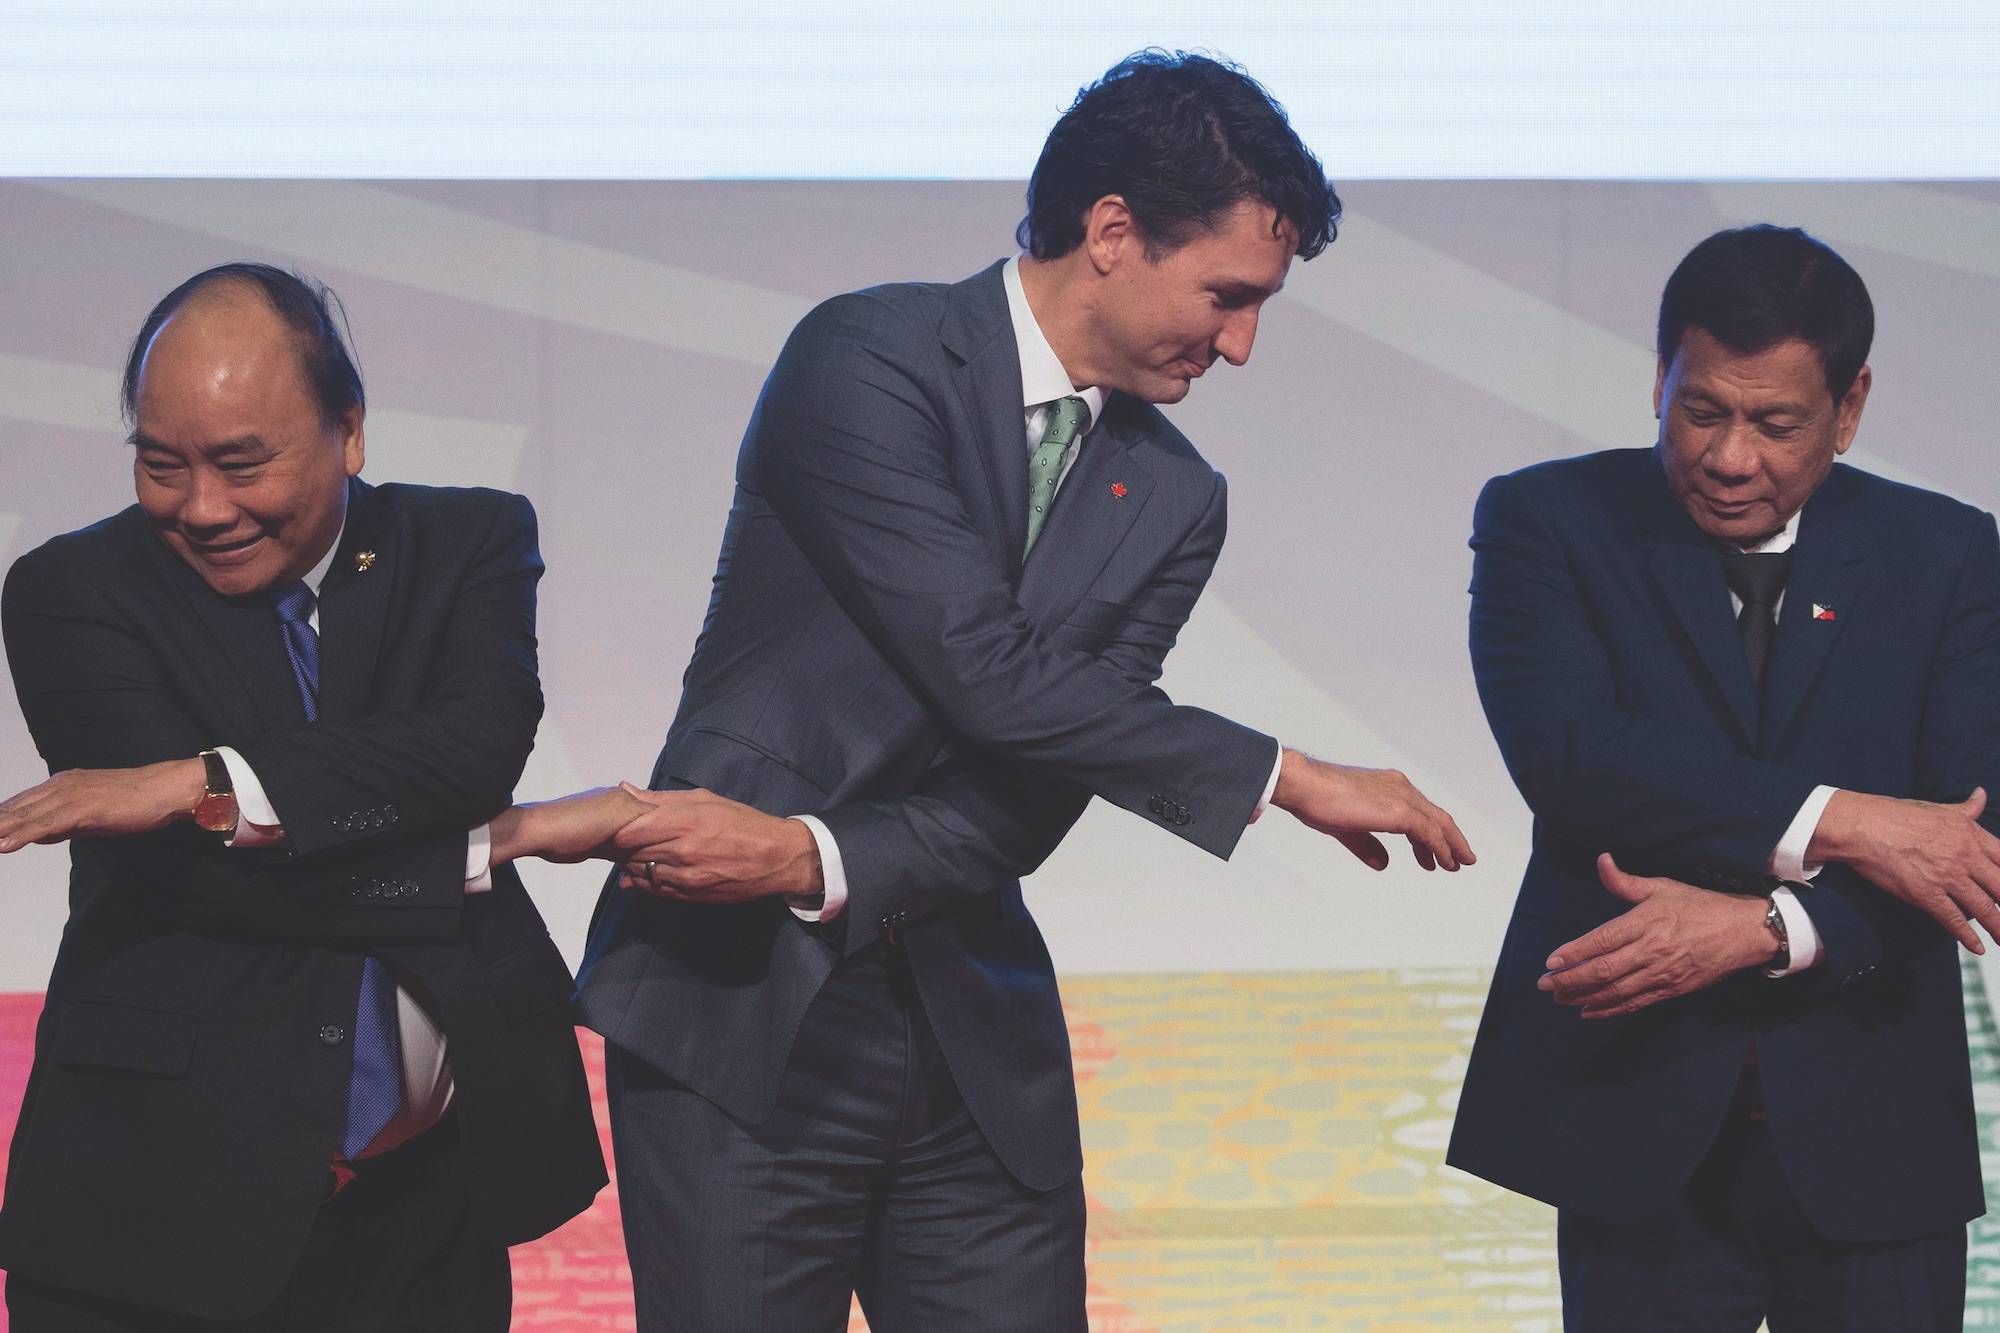 Canadian Prime Minister Justin Trudeau shakes hands with Vietnamese Prime Minister Nguyen Xuan Phuc and Philippine President Rodrigo Duterte during a photo for the ASEAN-Canada 40th Commemorative session in Manila, Philippines, Tuesday, November 14, 2017. THE CANADIAN PRESS/Adrian Wyld